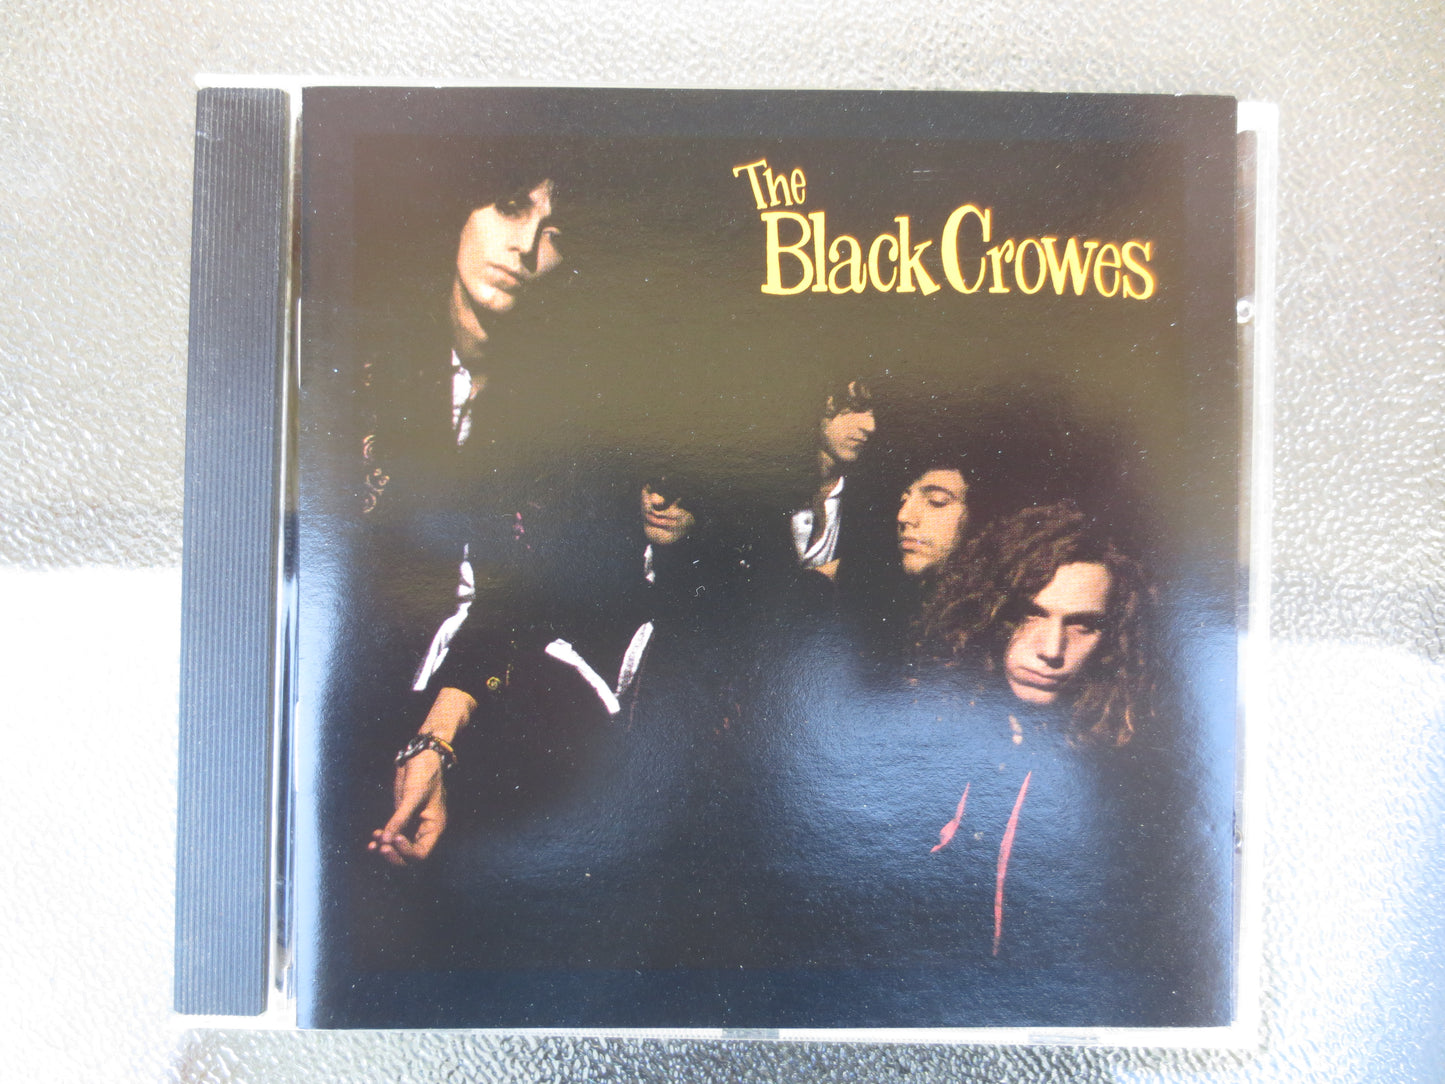 The BLACK CROWES, Shake Your MONEY, Black Crowes Cd, Black Crowes Lp, Rock Cd, Classic Rock Cd, Music Cd, 1990 Compact Disc